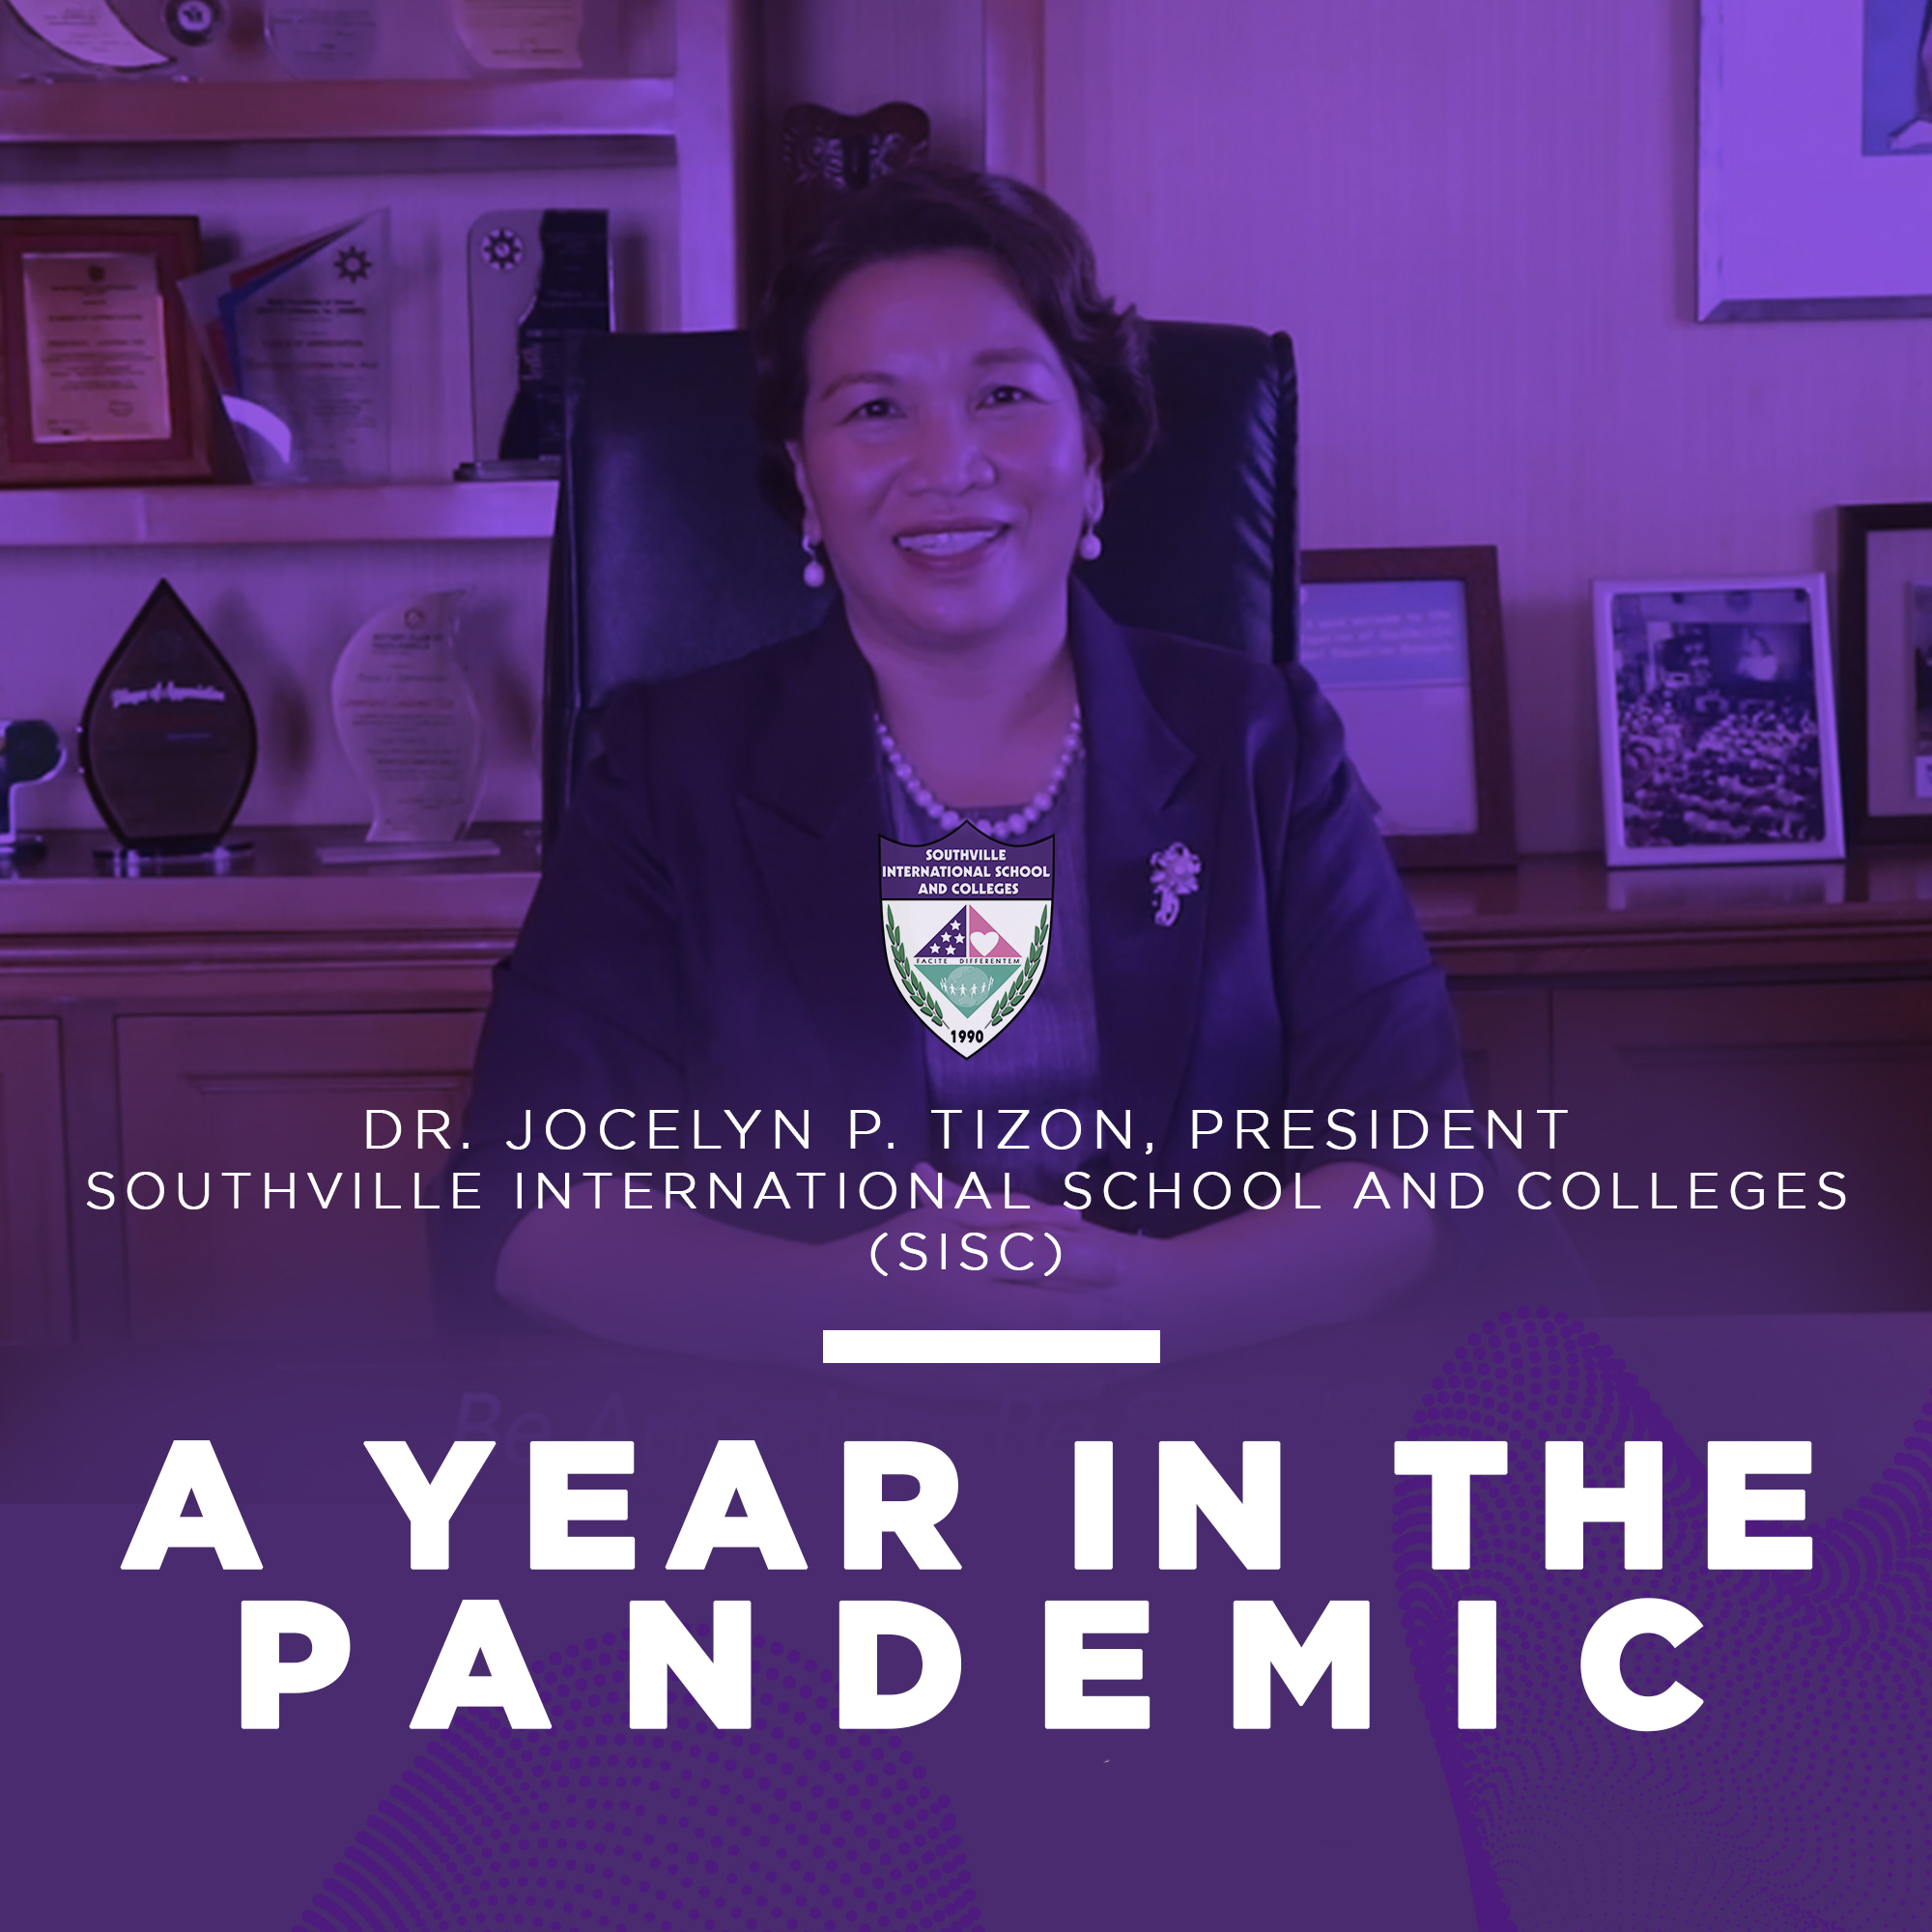 Southville: A Year in the Pandemic